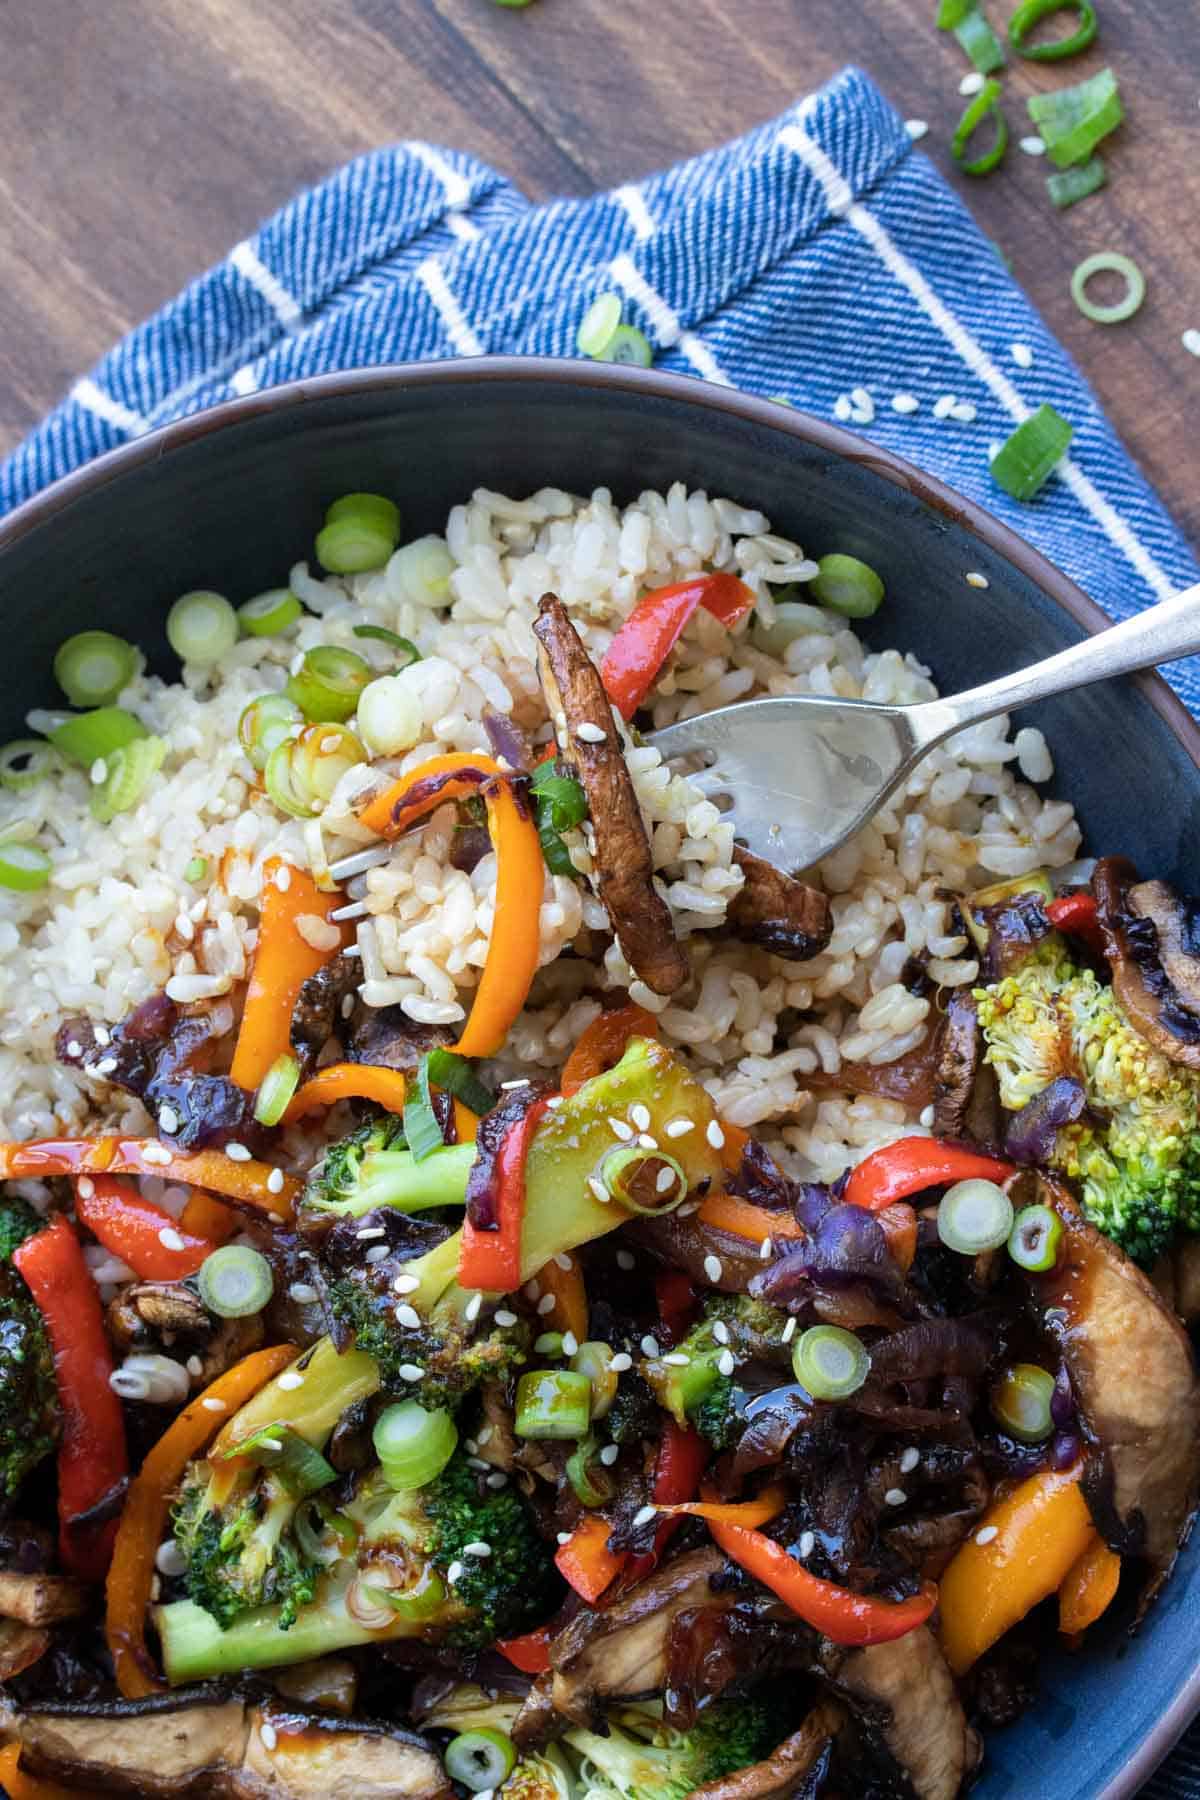 Fork getting a bite from a bowl of teriyaki stir fried veggies and rice